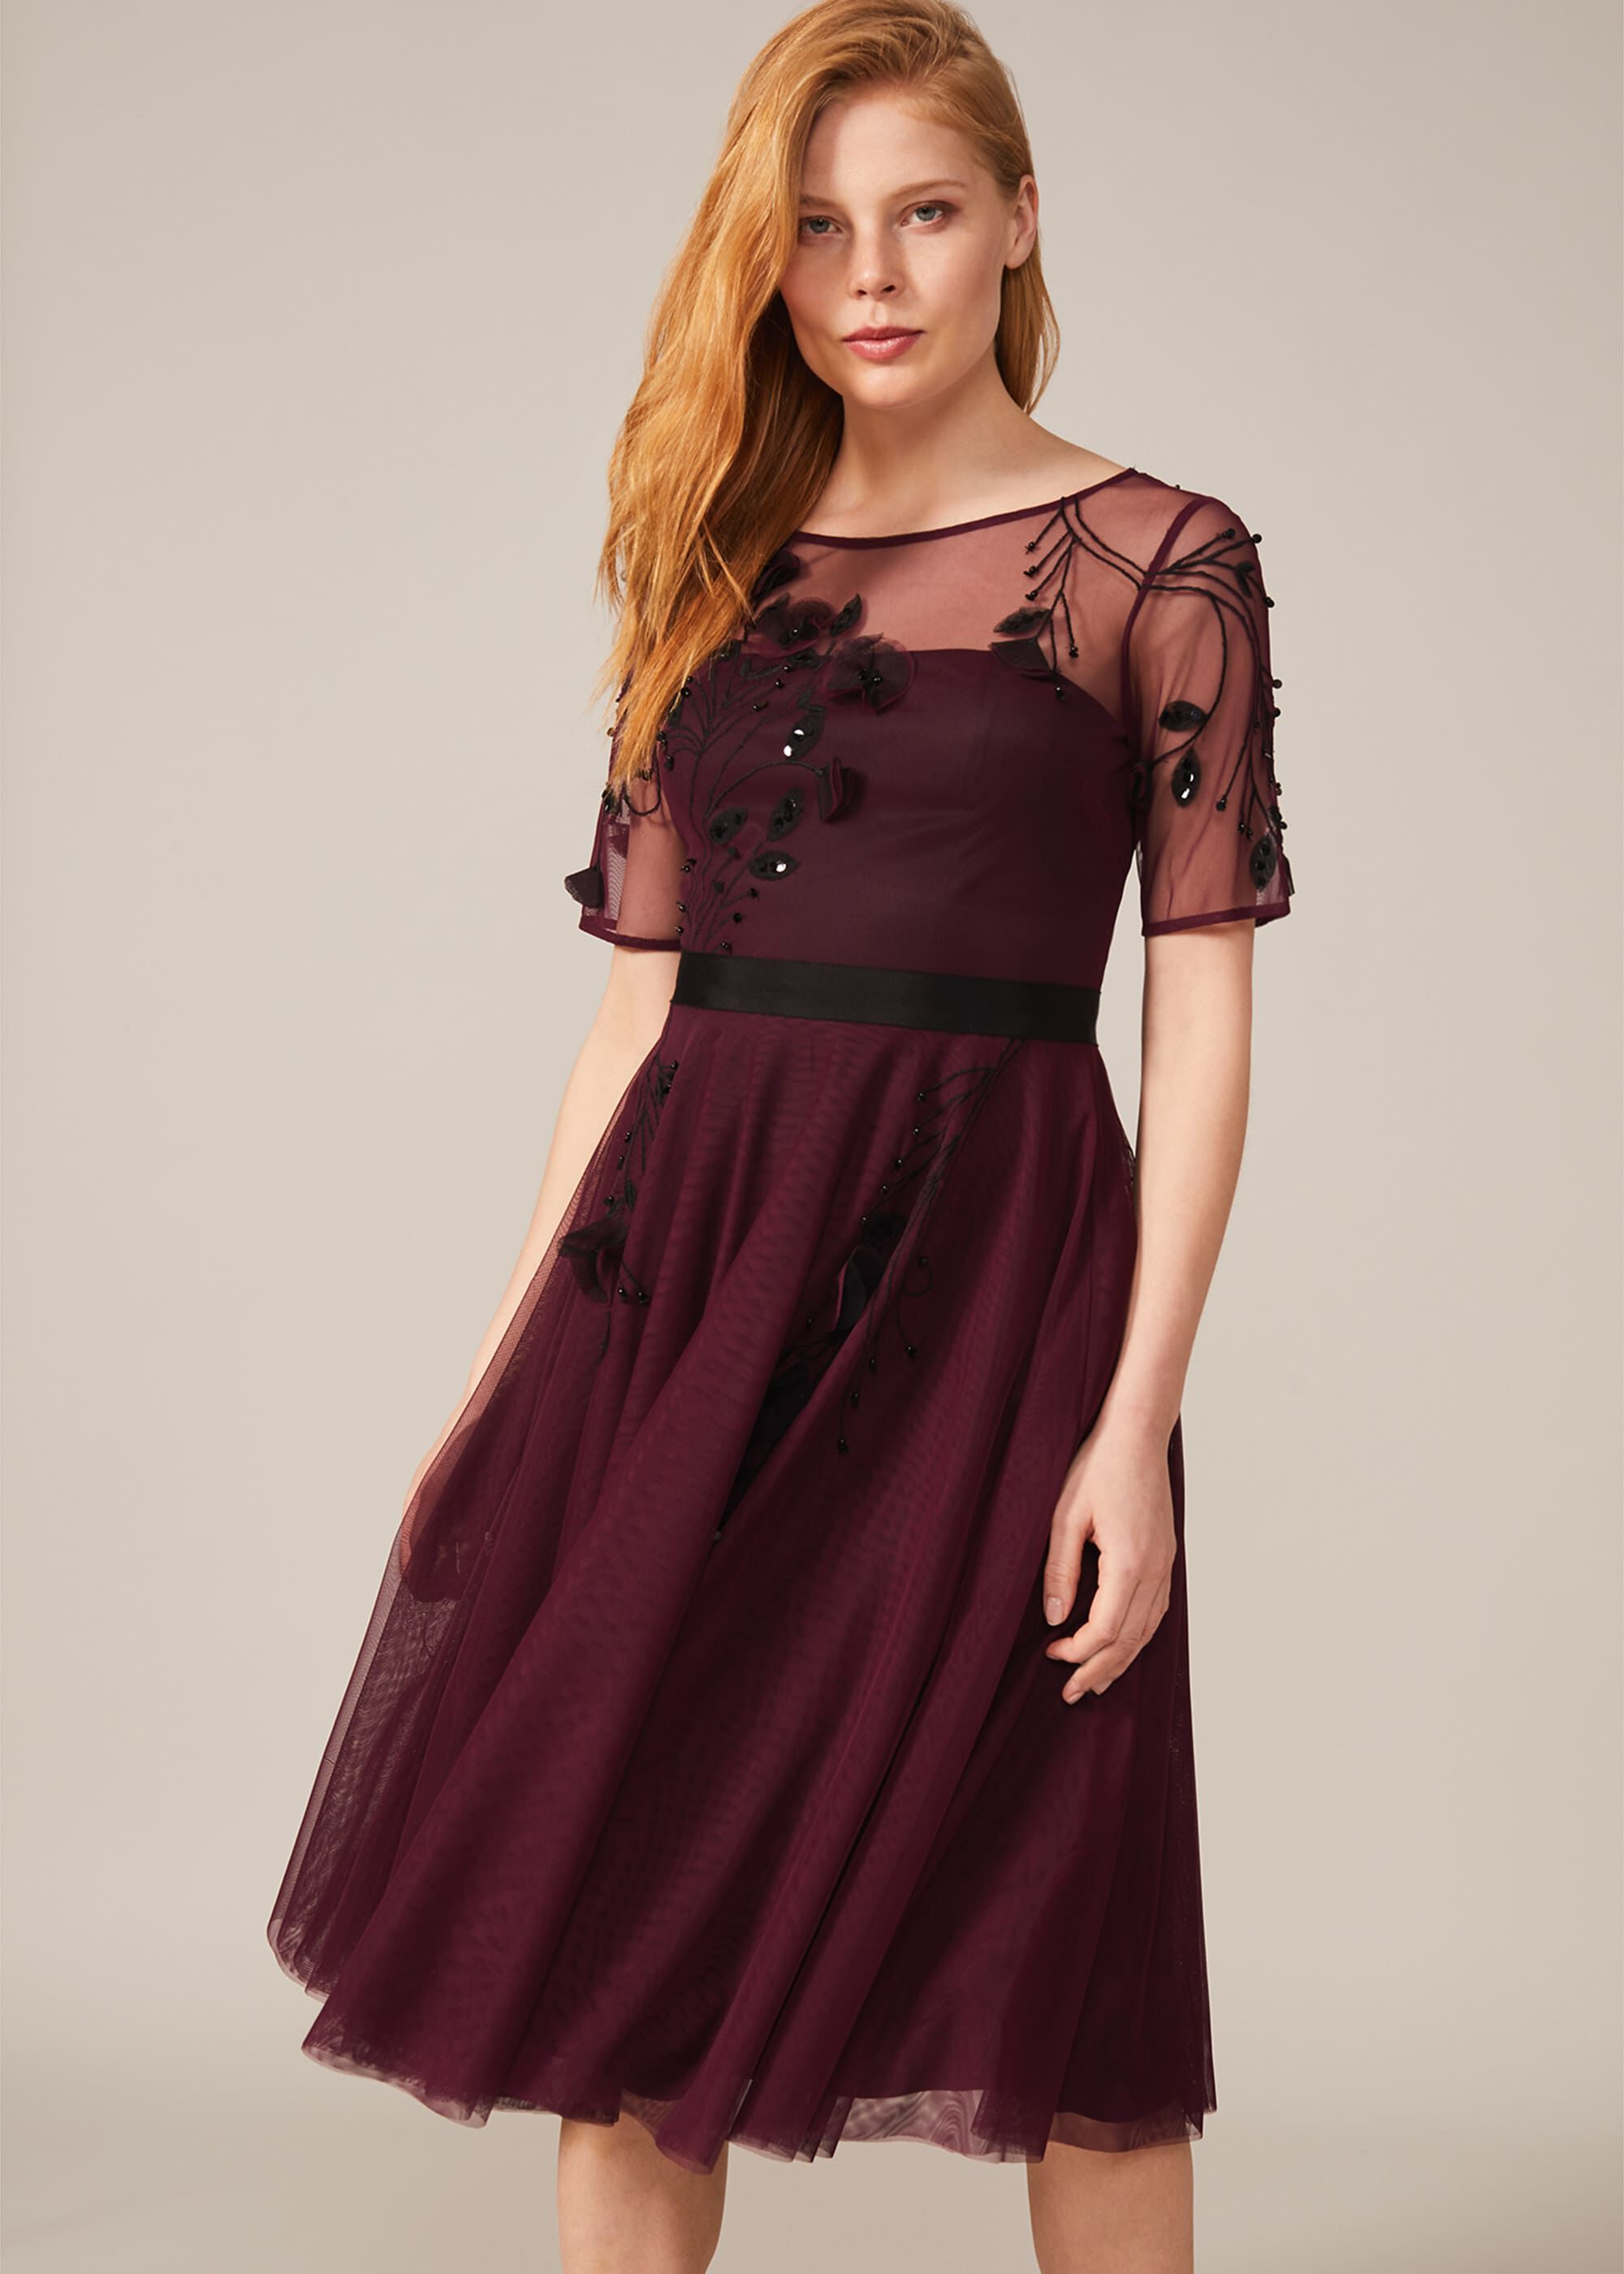 phase 8 special occasion dress